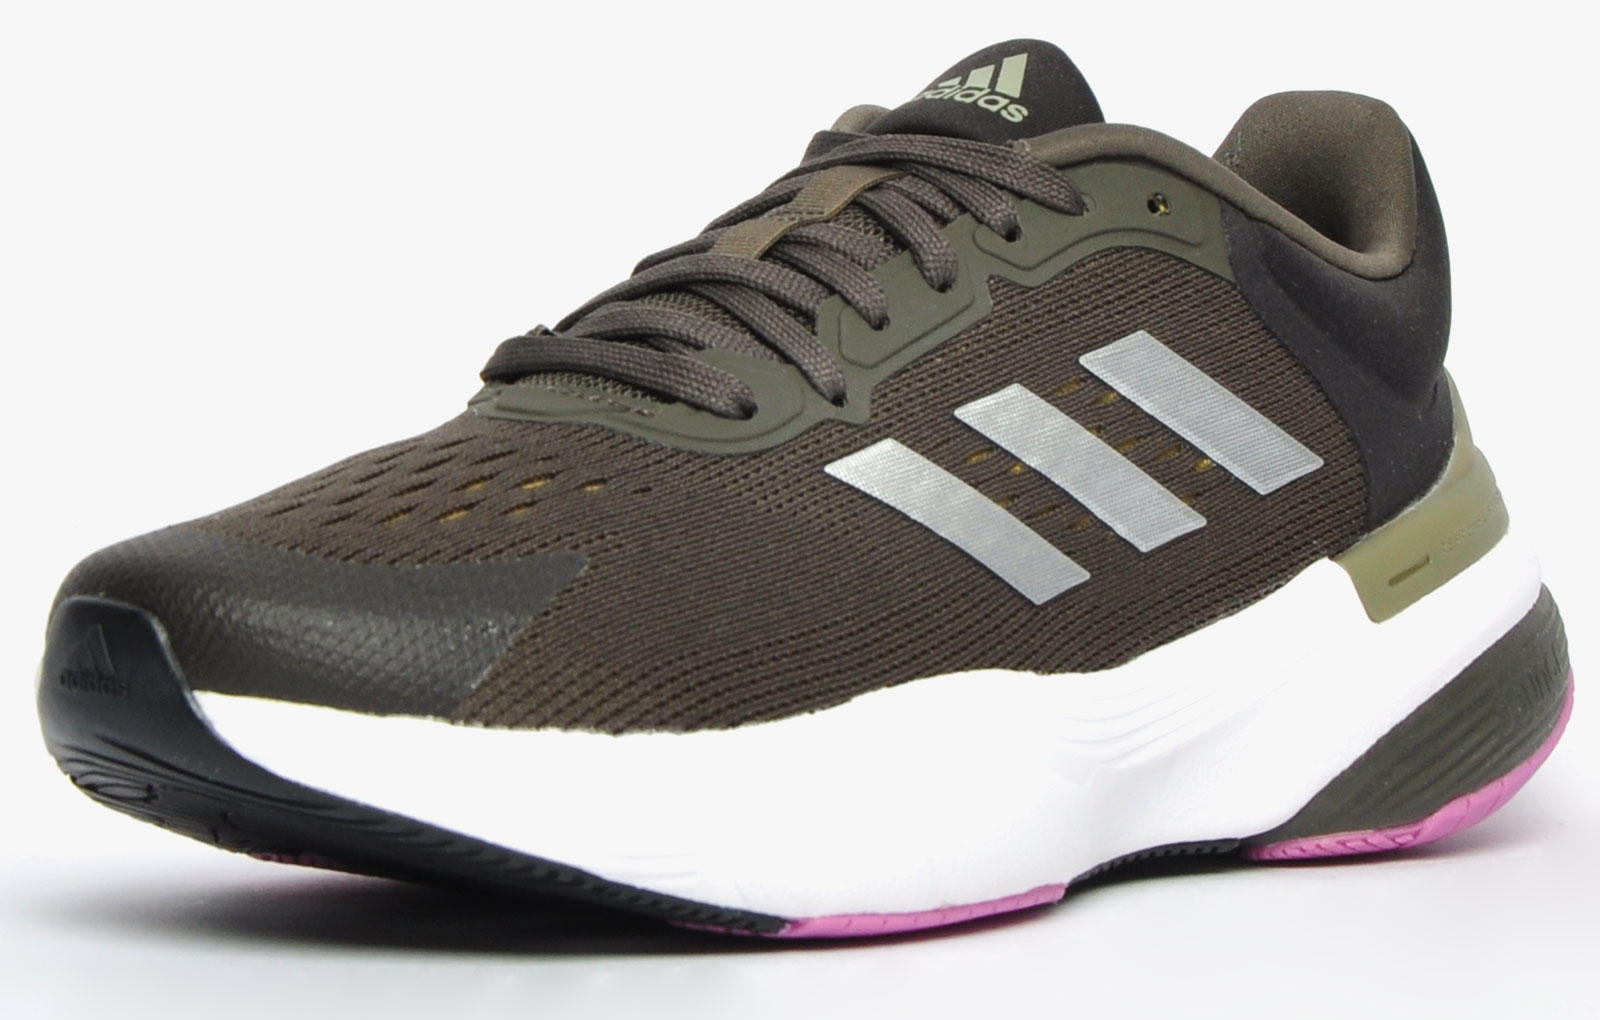 Adidas Response Super 3.0 Bounce Mens - Express Trainers